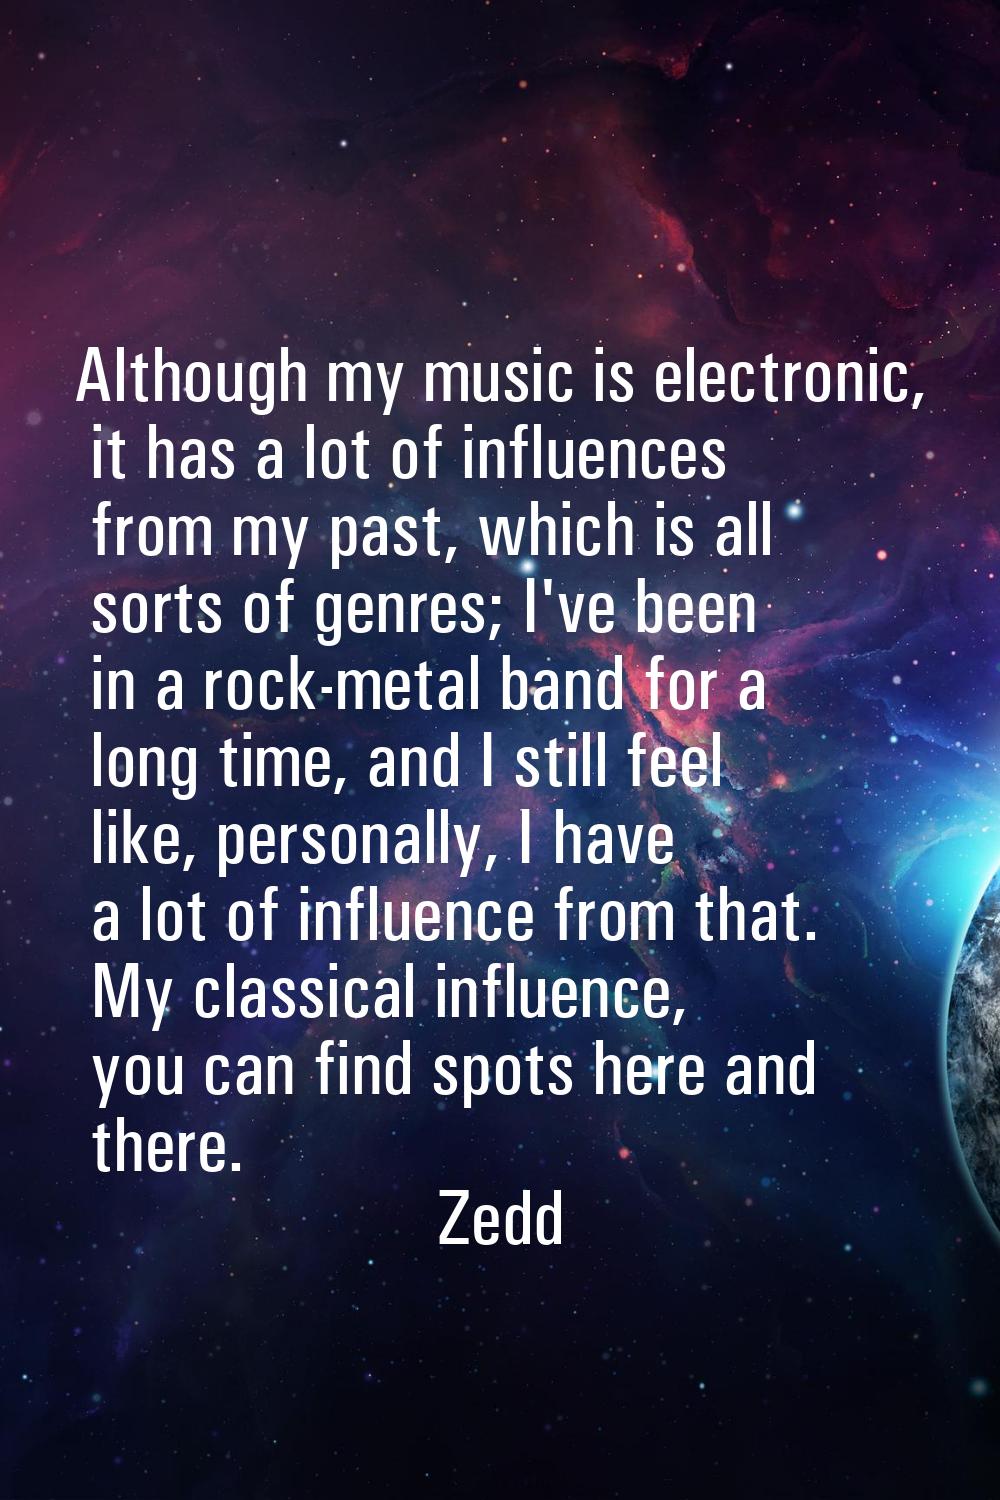 Although my music is electronic, it has a lot of influences from my past, which is all sorts of gen